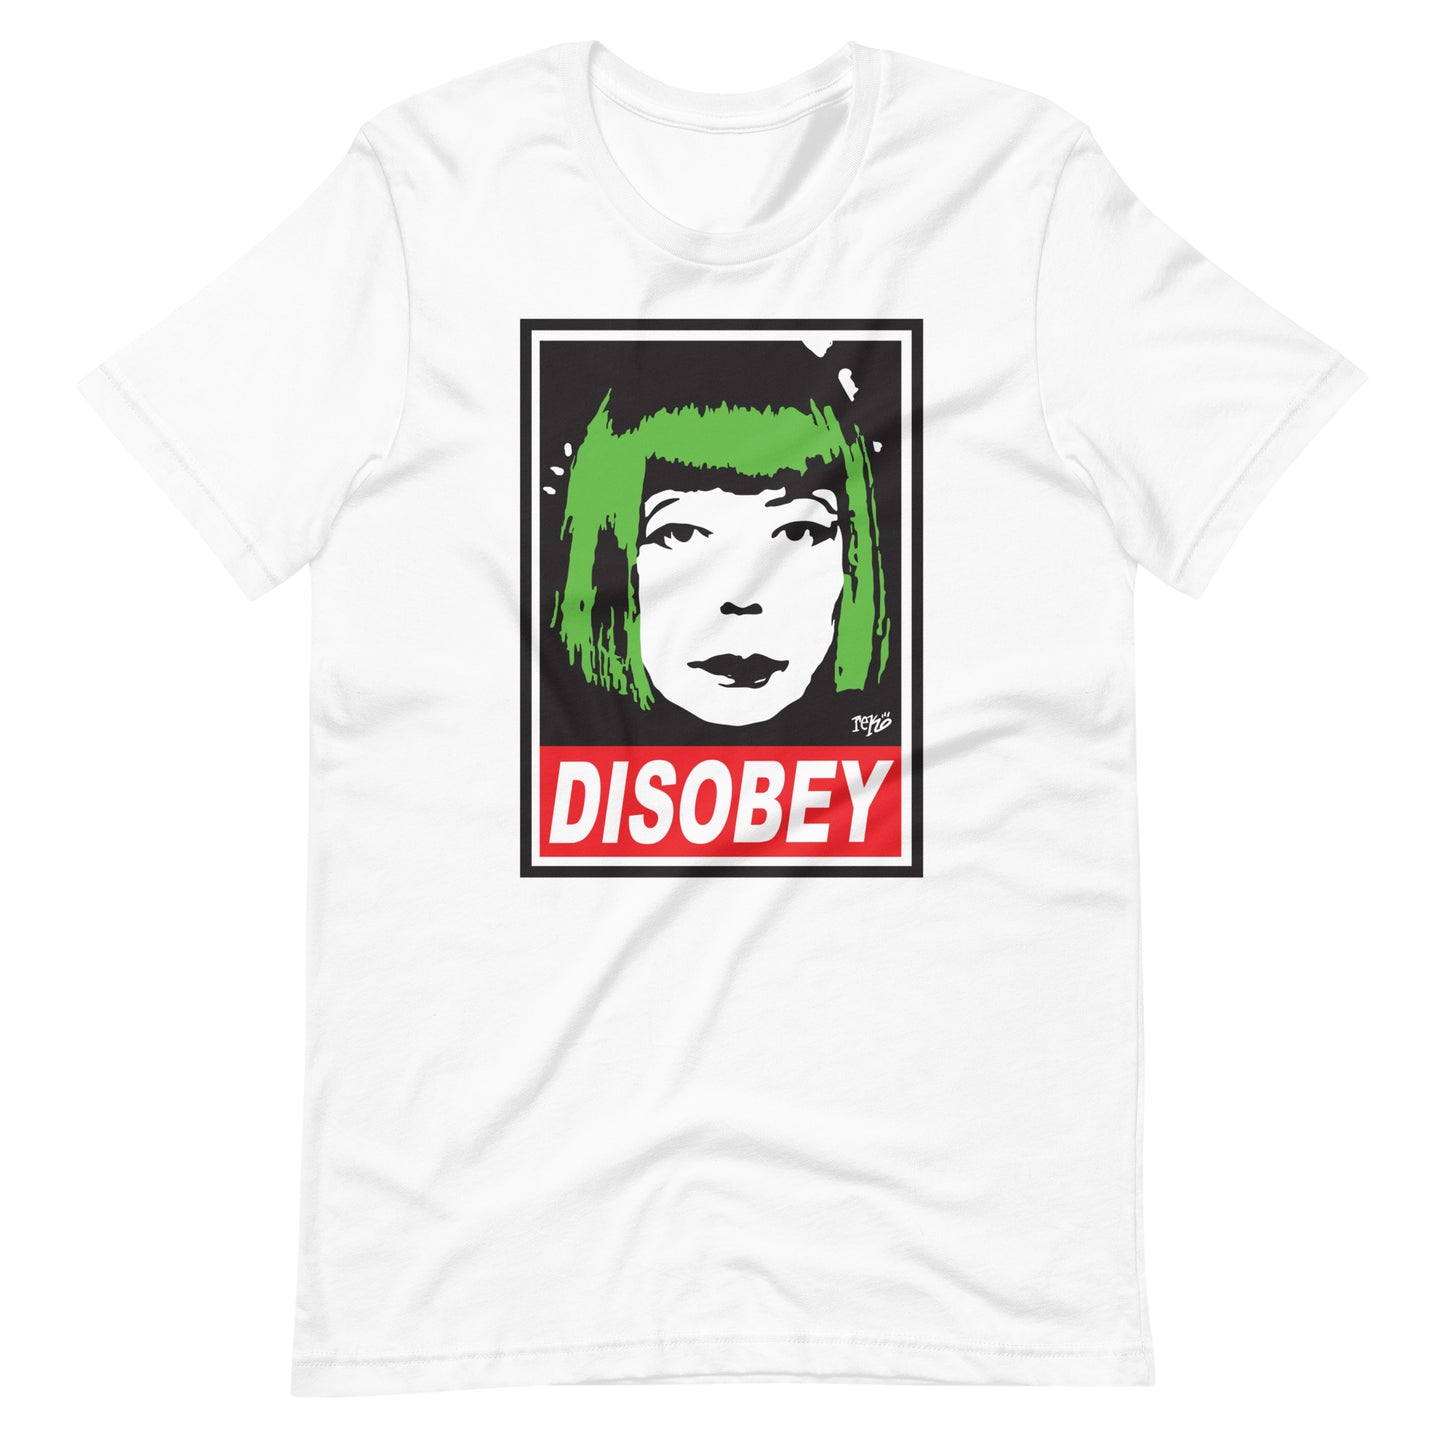 Disobey Green T-shirt